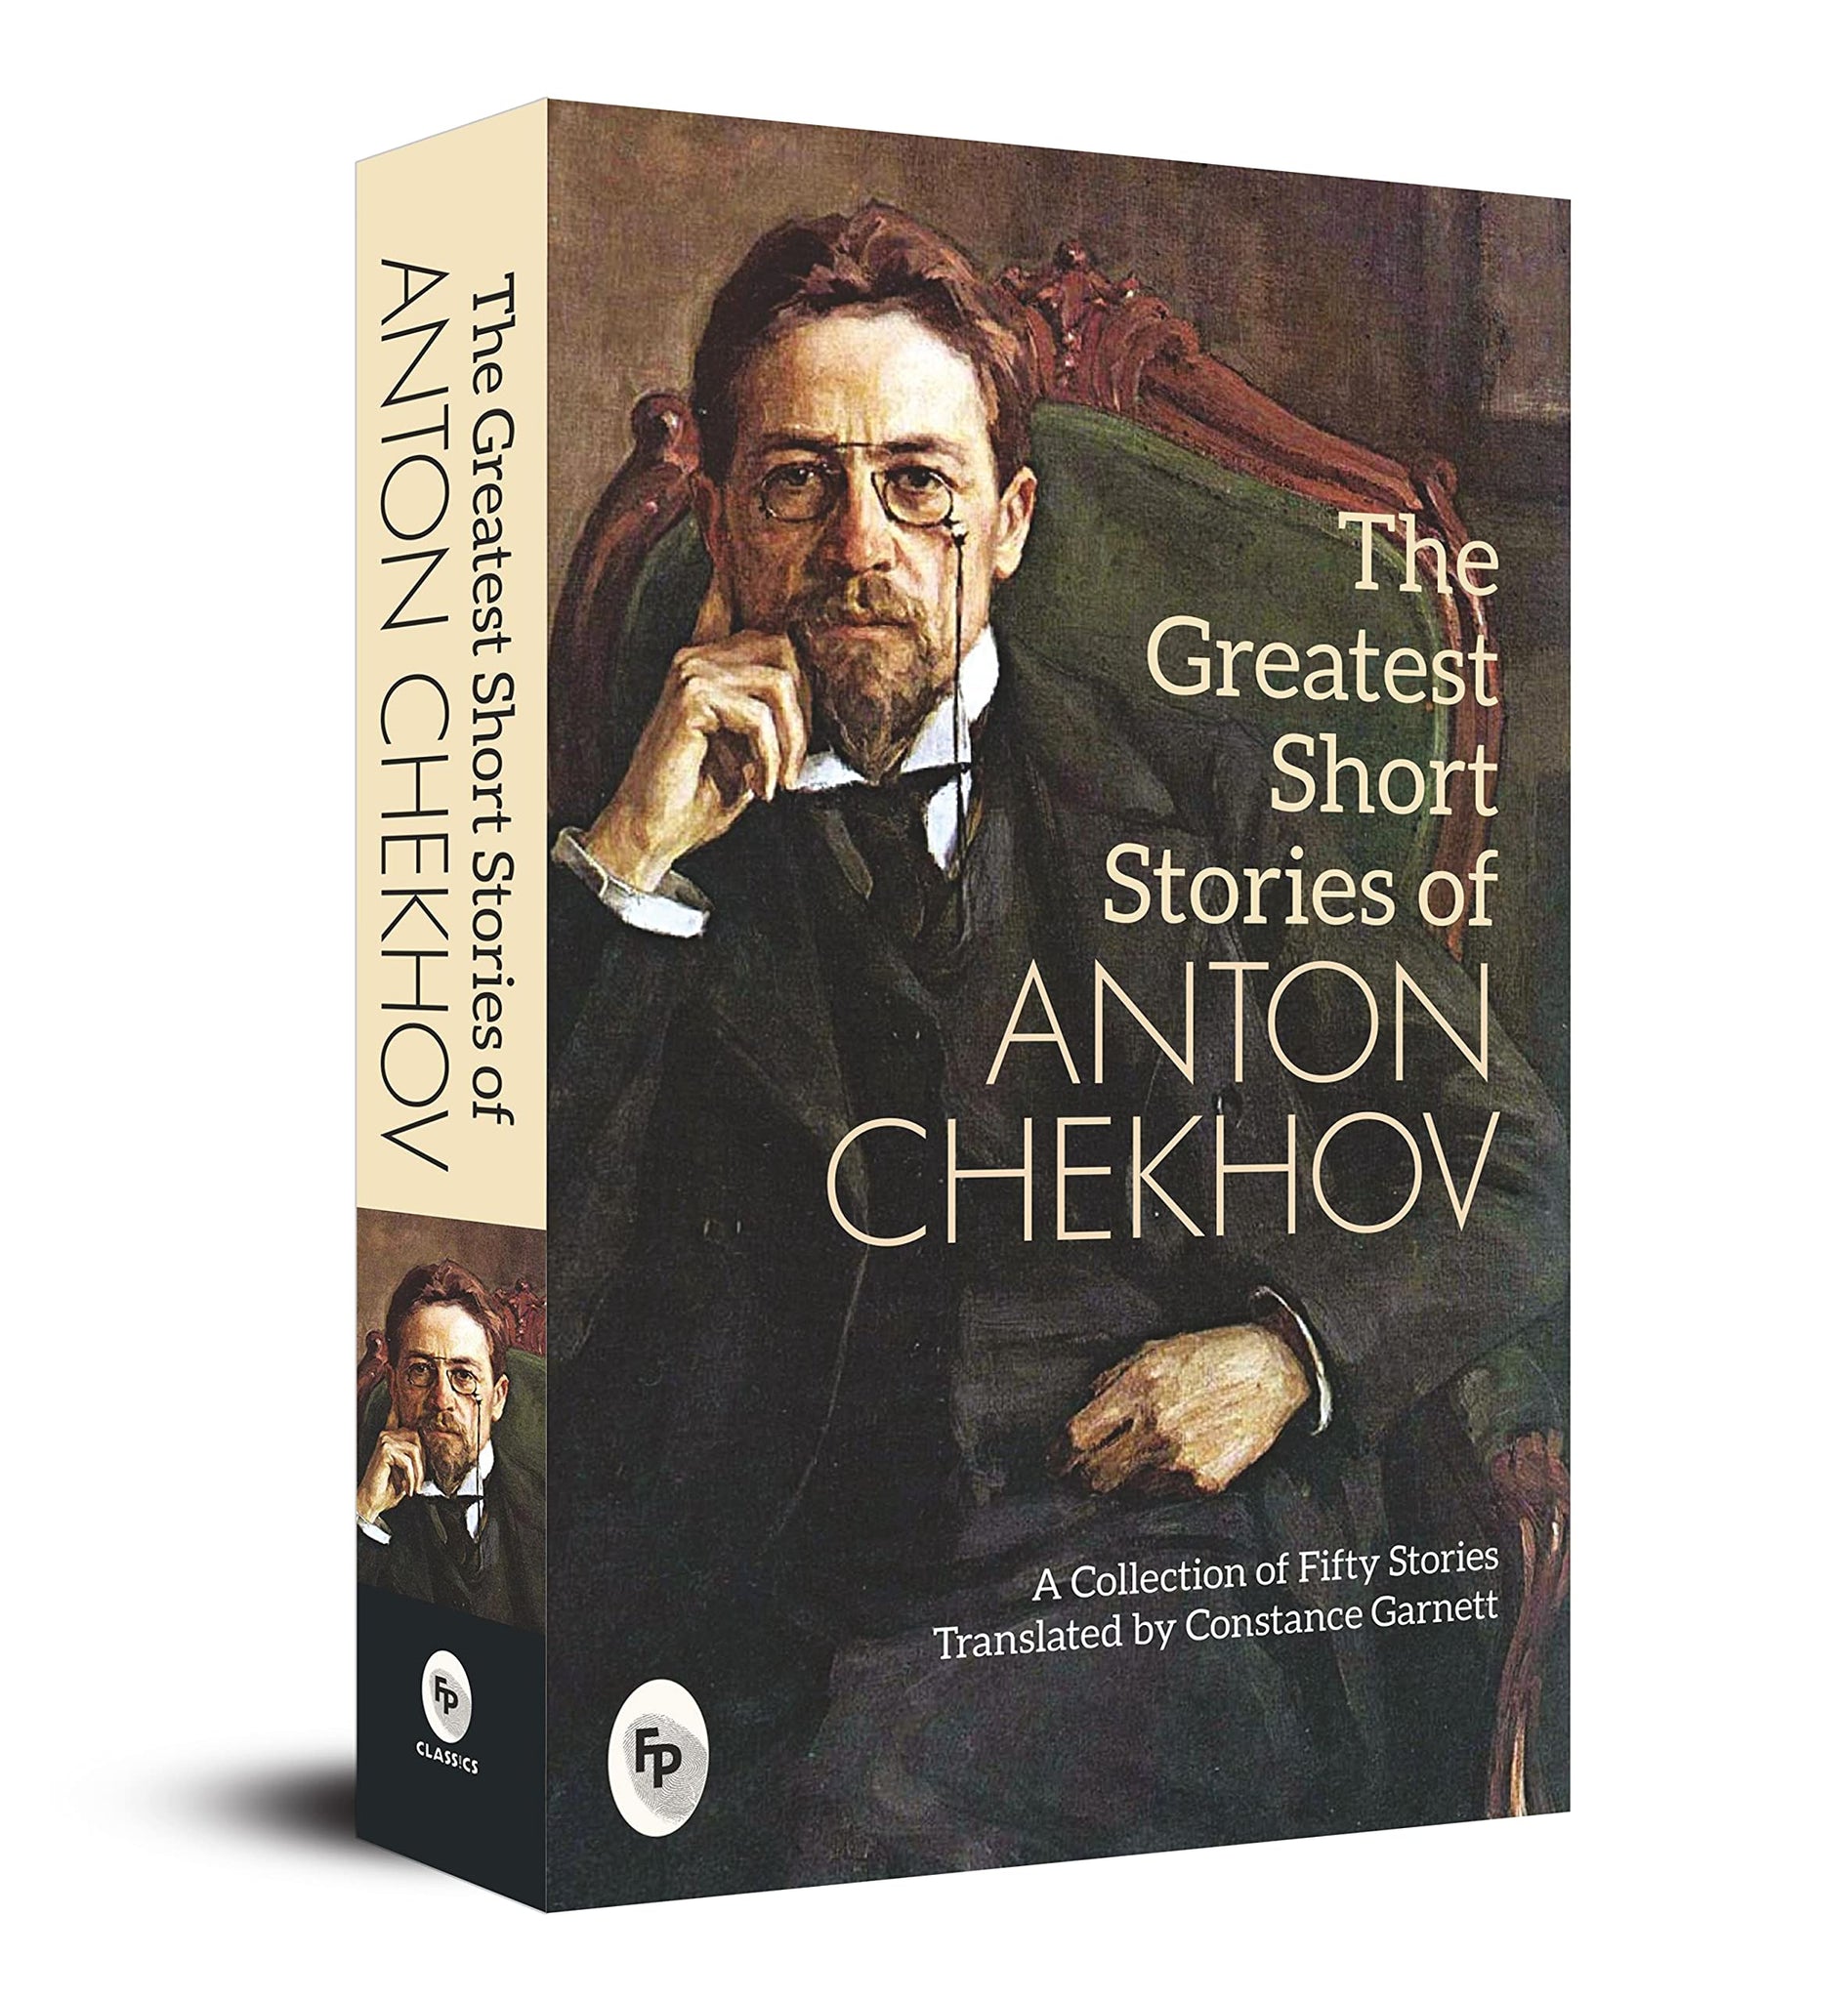 The Greatest Short Stories Of Anton Chekhov: A Collection Of Fifty Stories